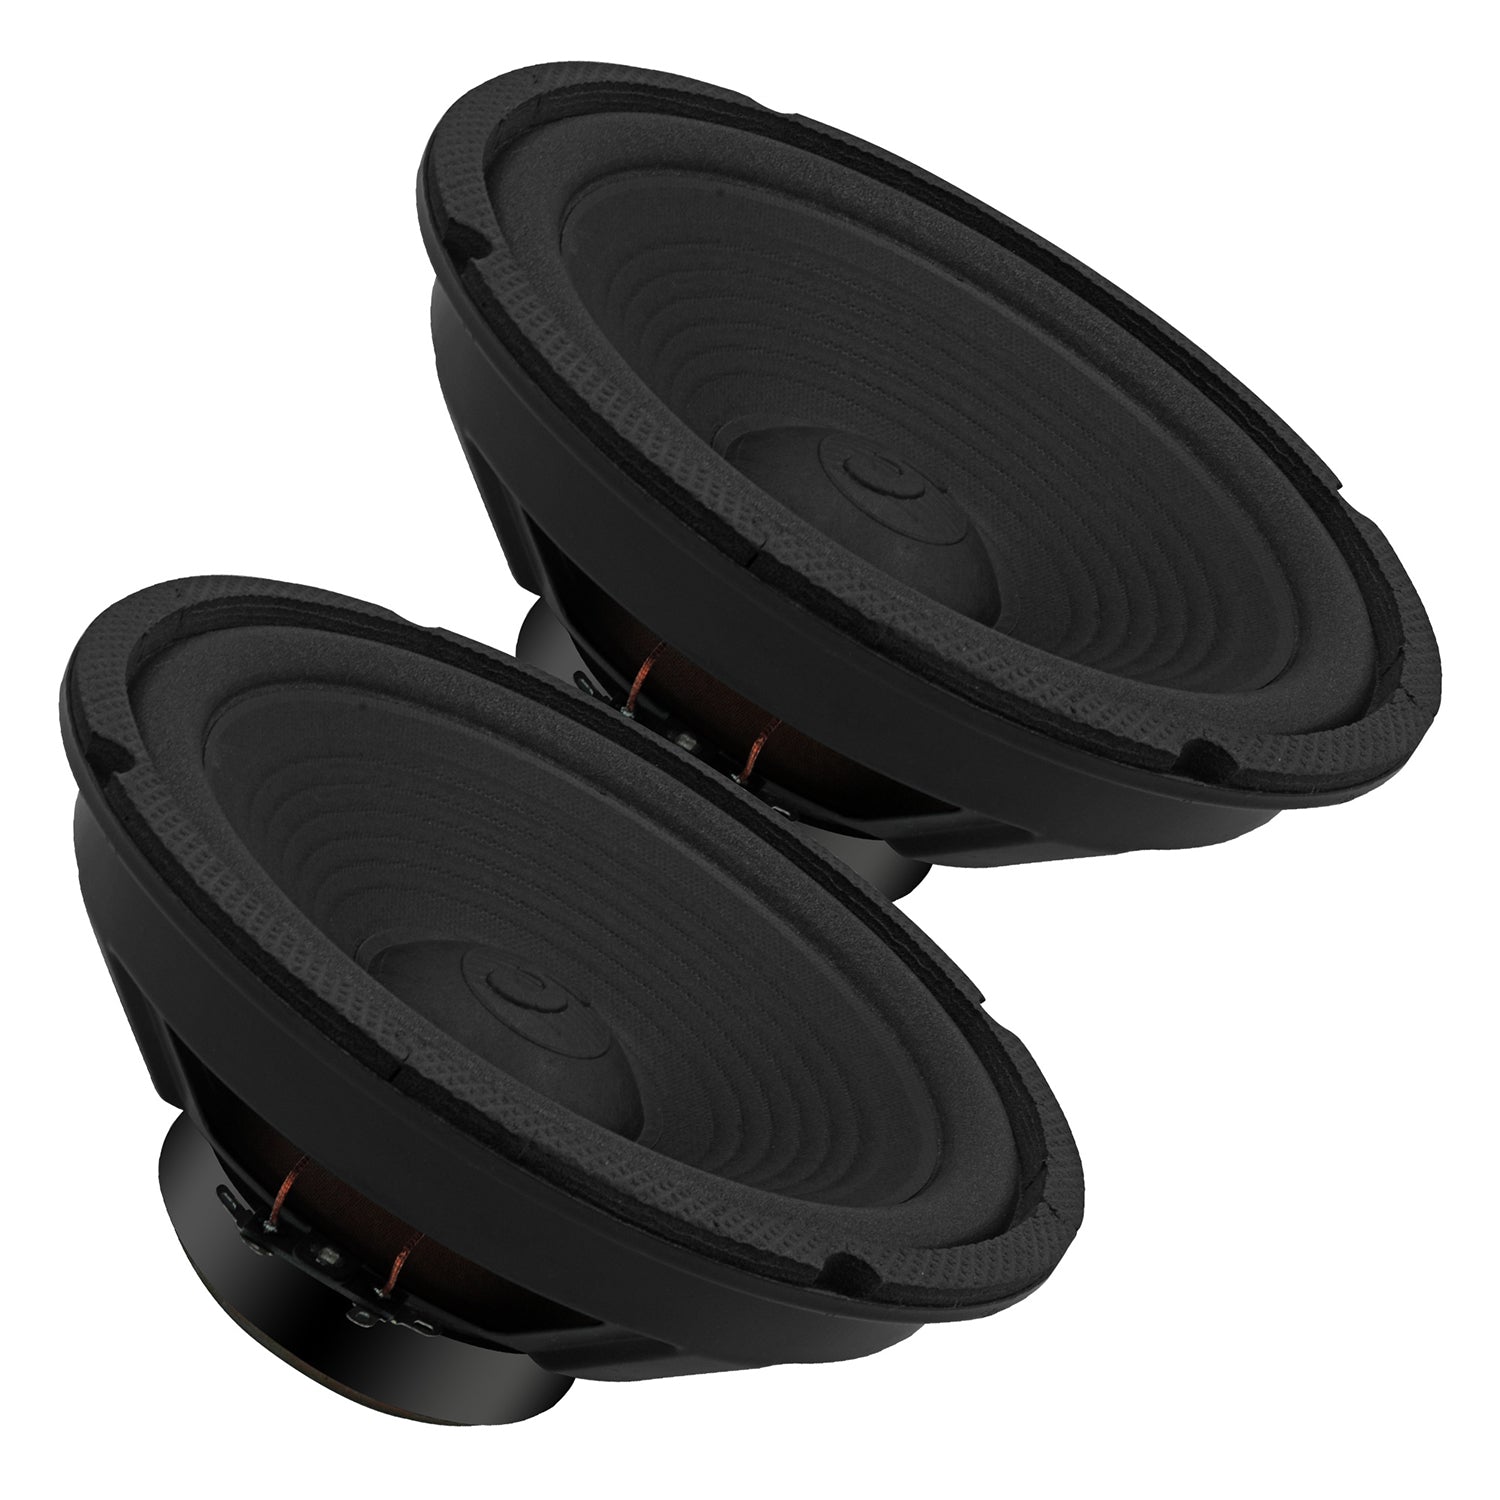 5 CORE Car Subwoofer Audio Speaker - 8 inch 4 Ohm, Foam Surround for Vehicle Stereo Sound System 90mm Magnet Loudspeaker Woofer Replacement Black 2 Pieces - WF 8"-890 2 PC